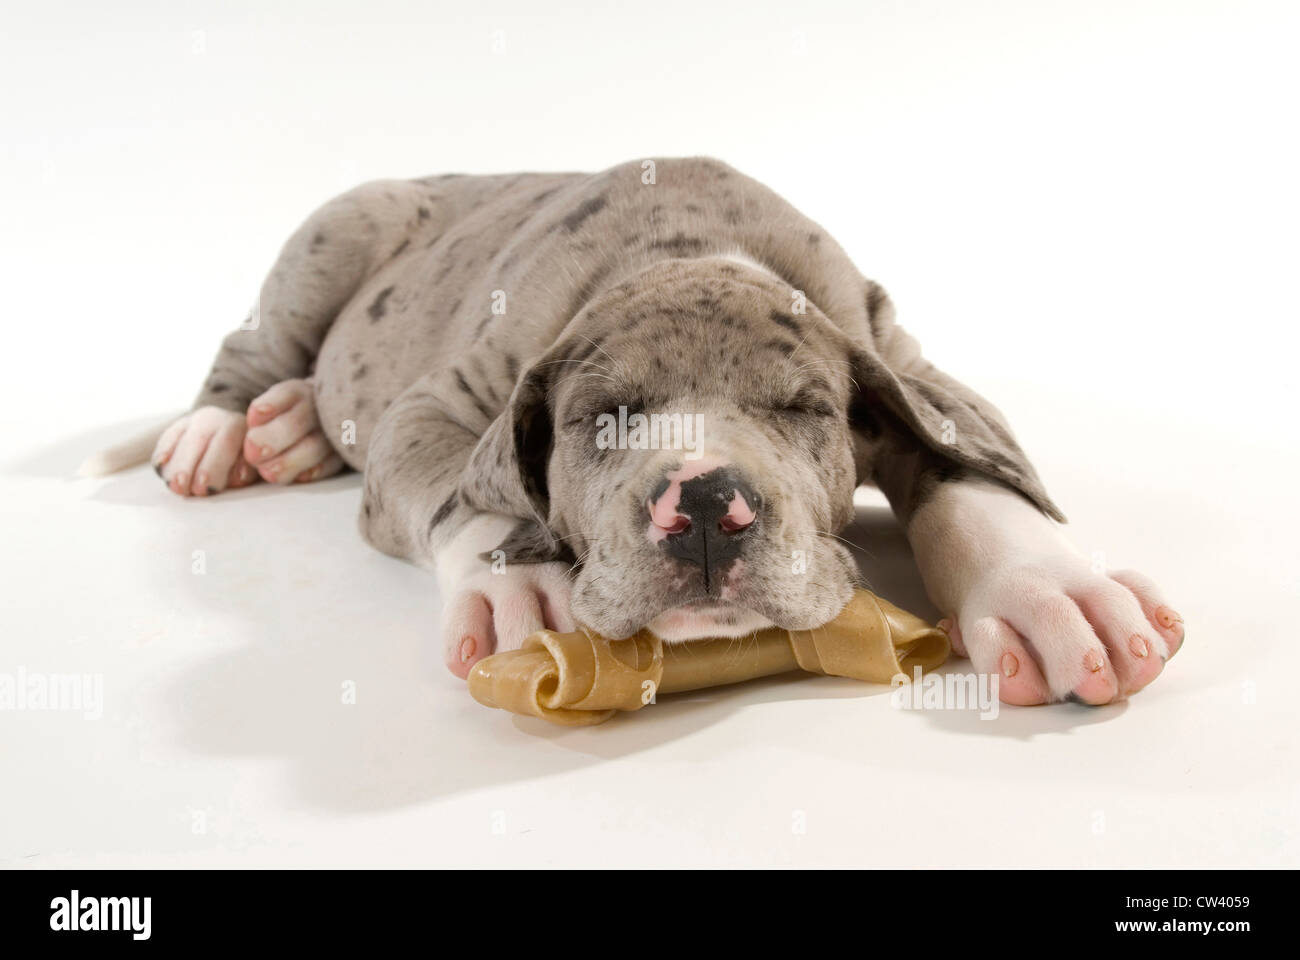 Great Dane. Puppy sleeping with its head resting on a chew bone. Studio picture against a white background Stock Photo